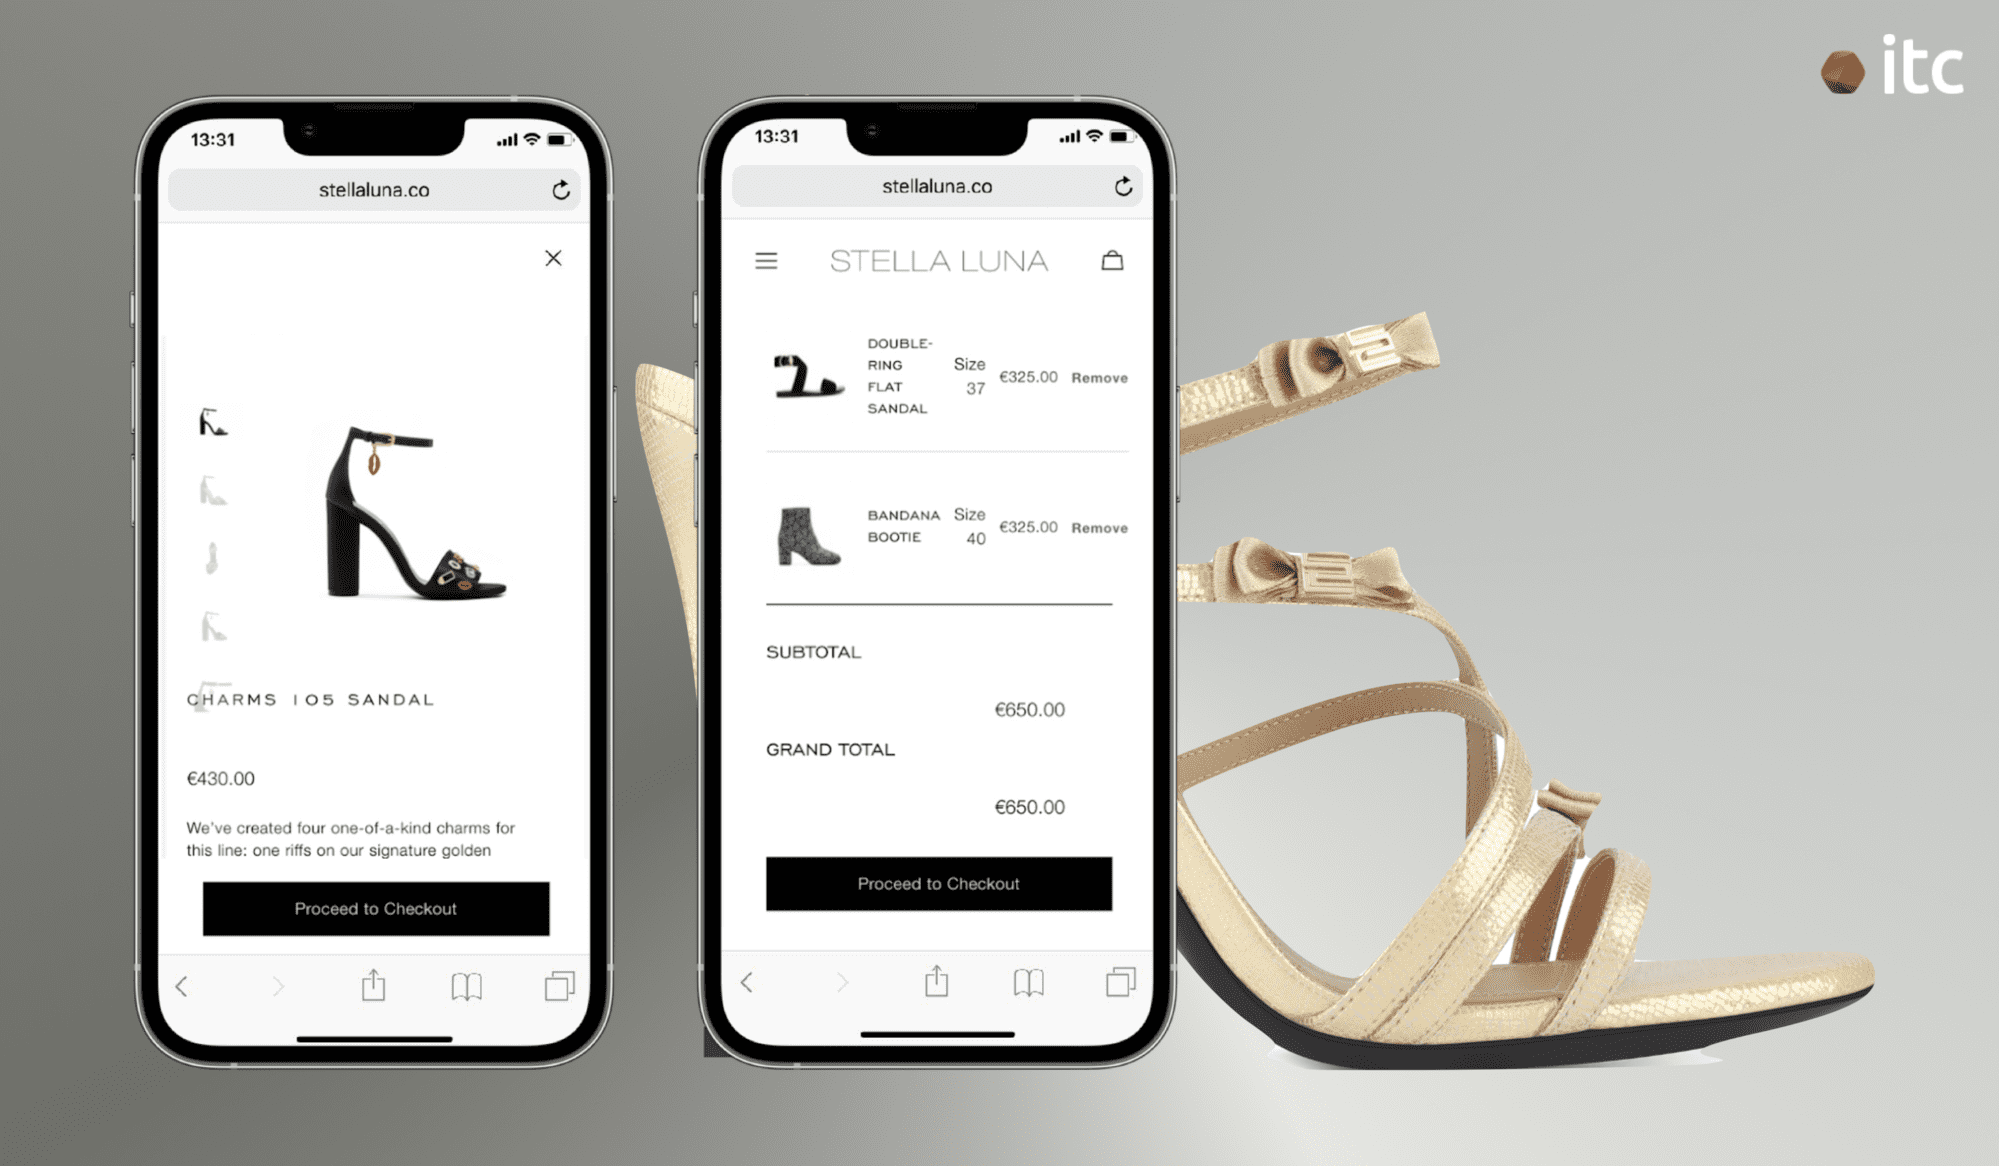 The Product Details page and Cart page as seen on the phone mockups